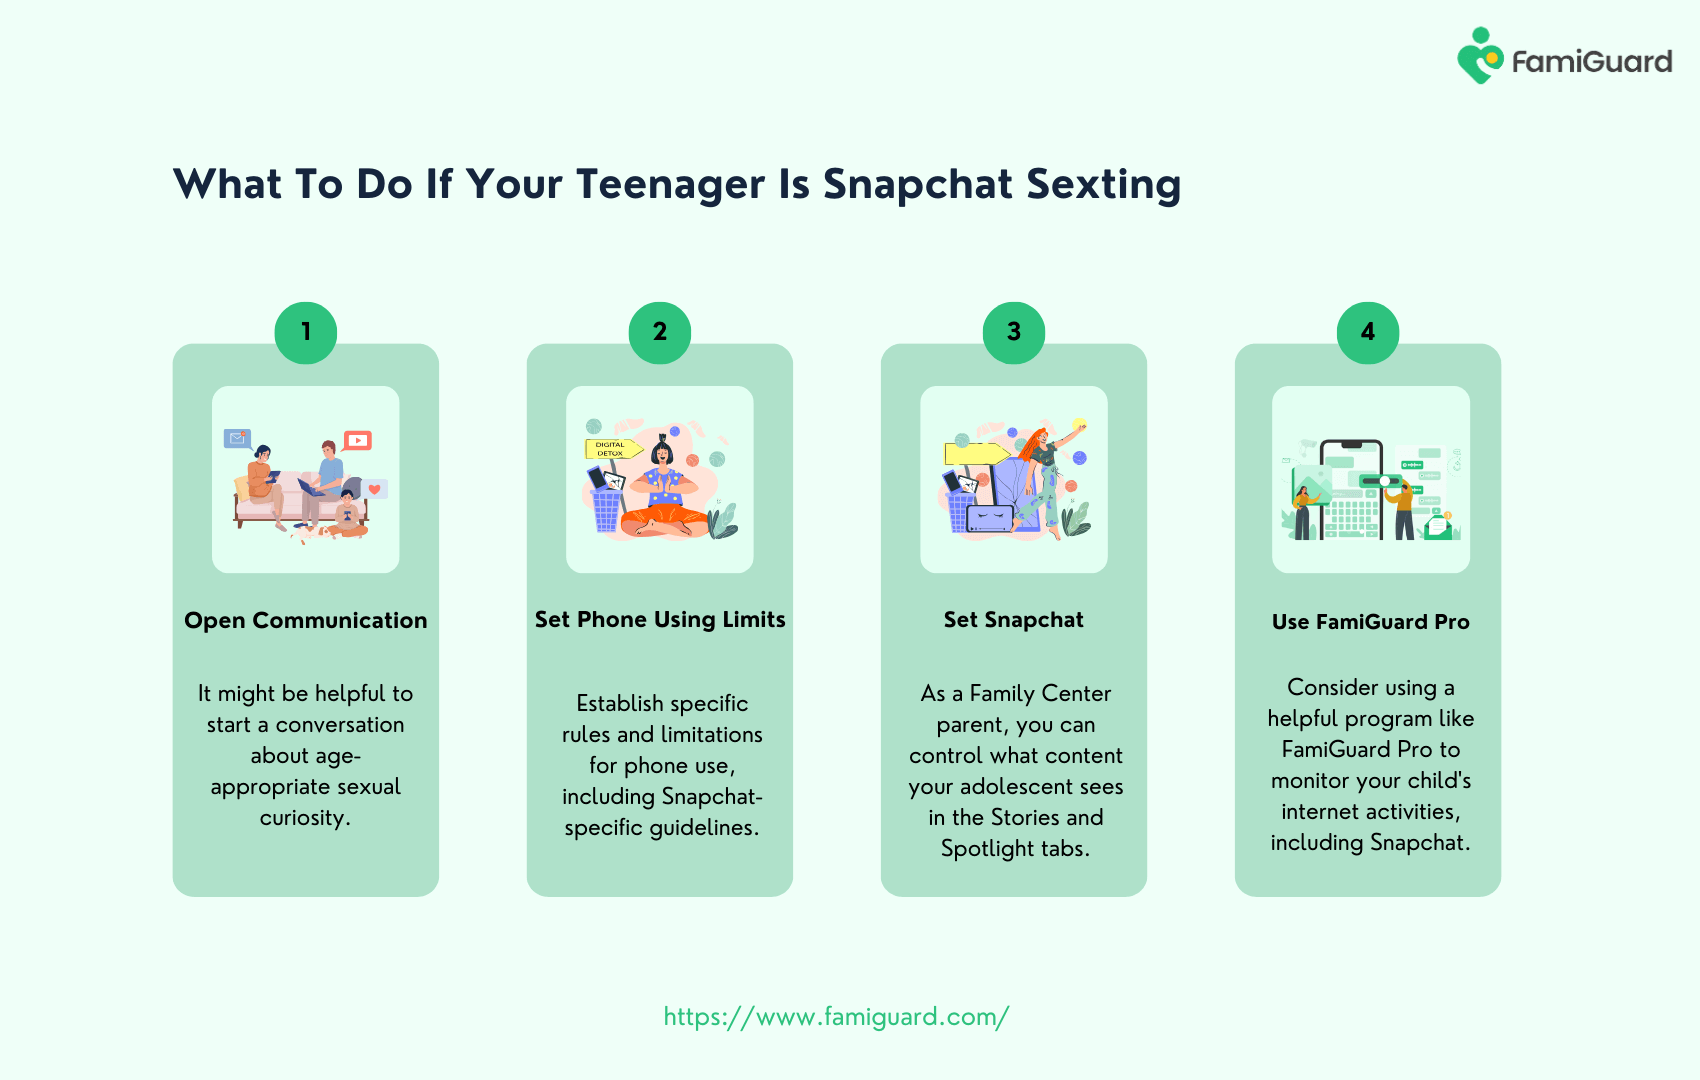 What To Do If Your Teenager Is Snapchat Sexting